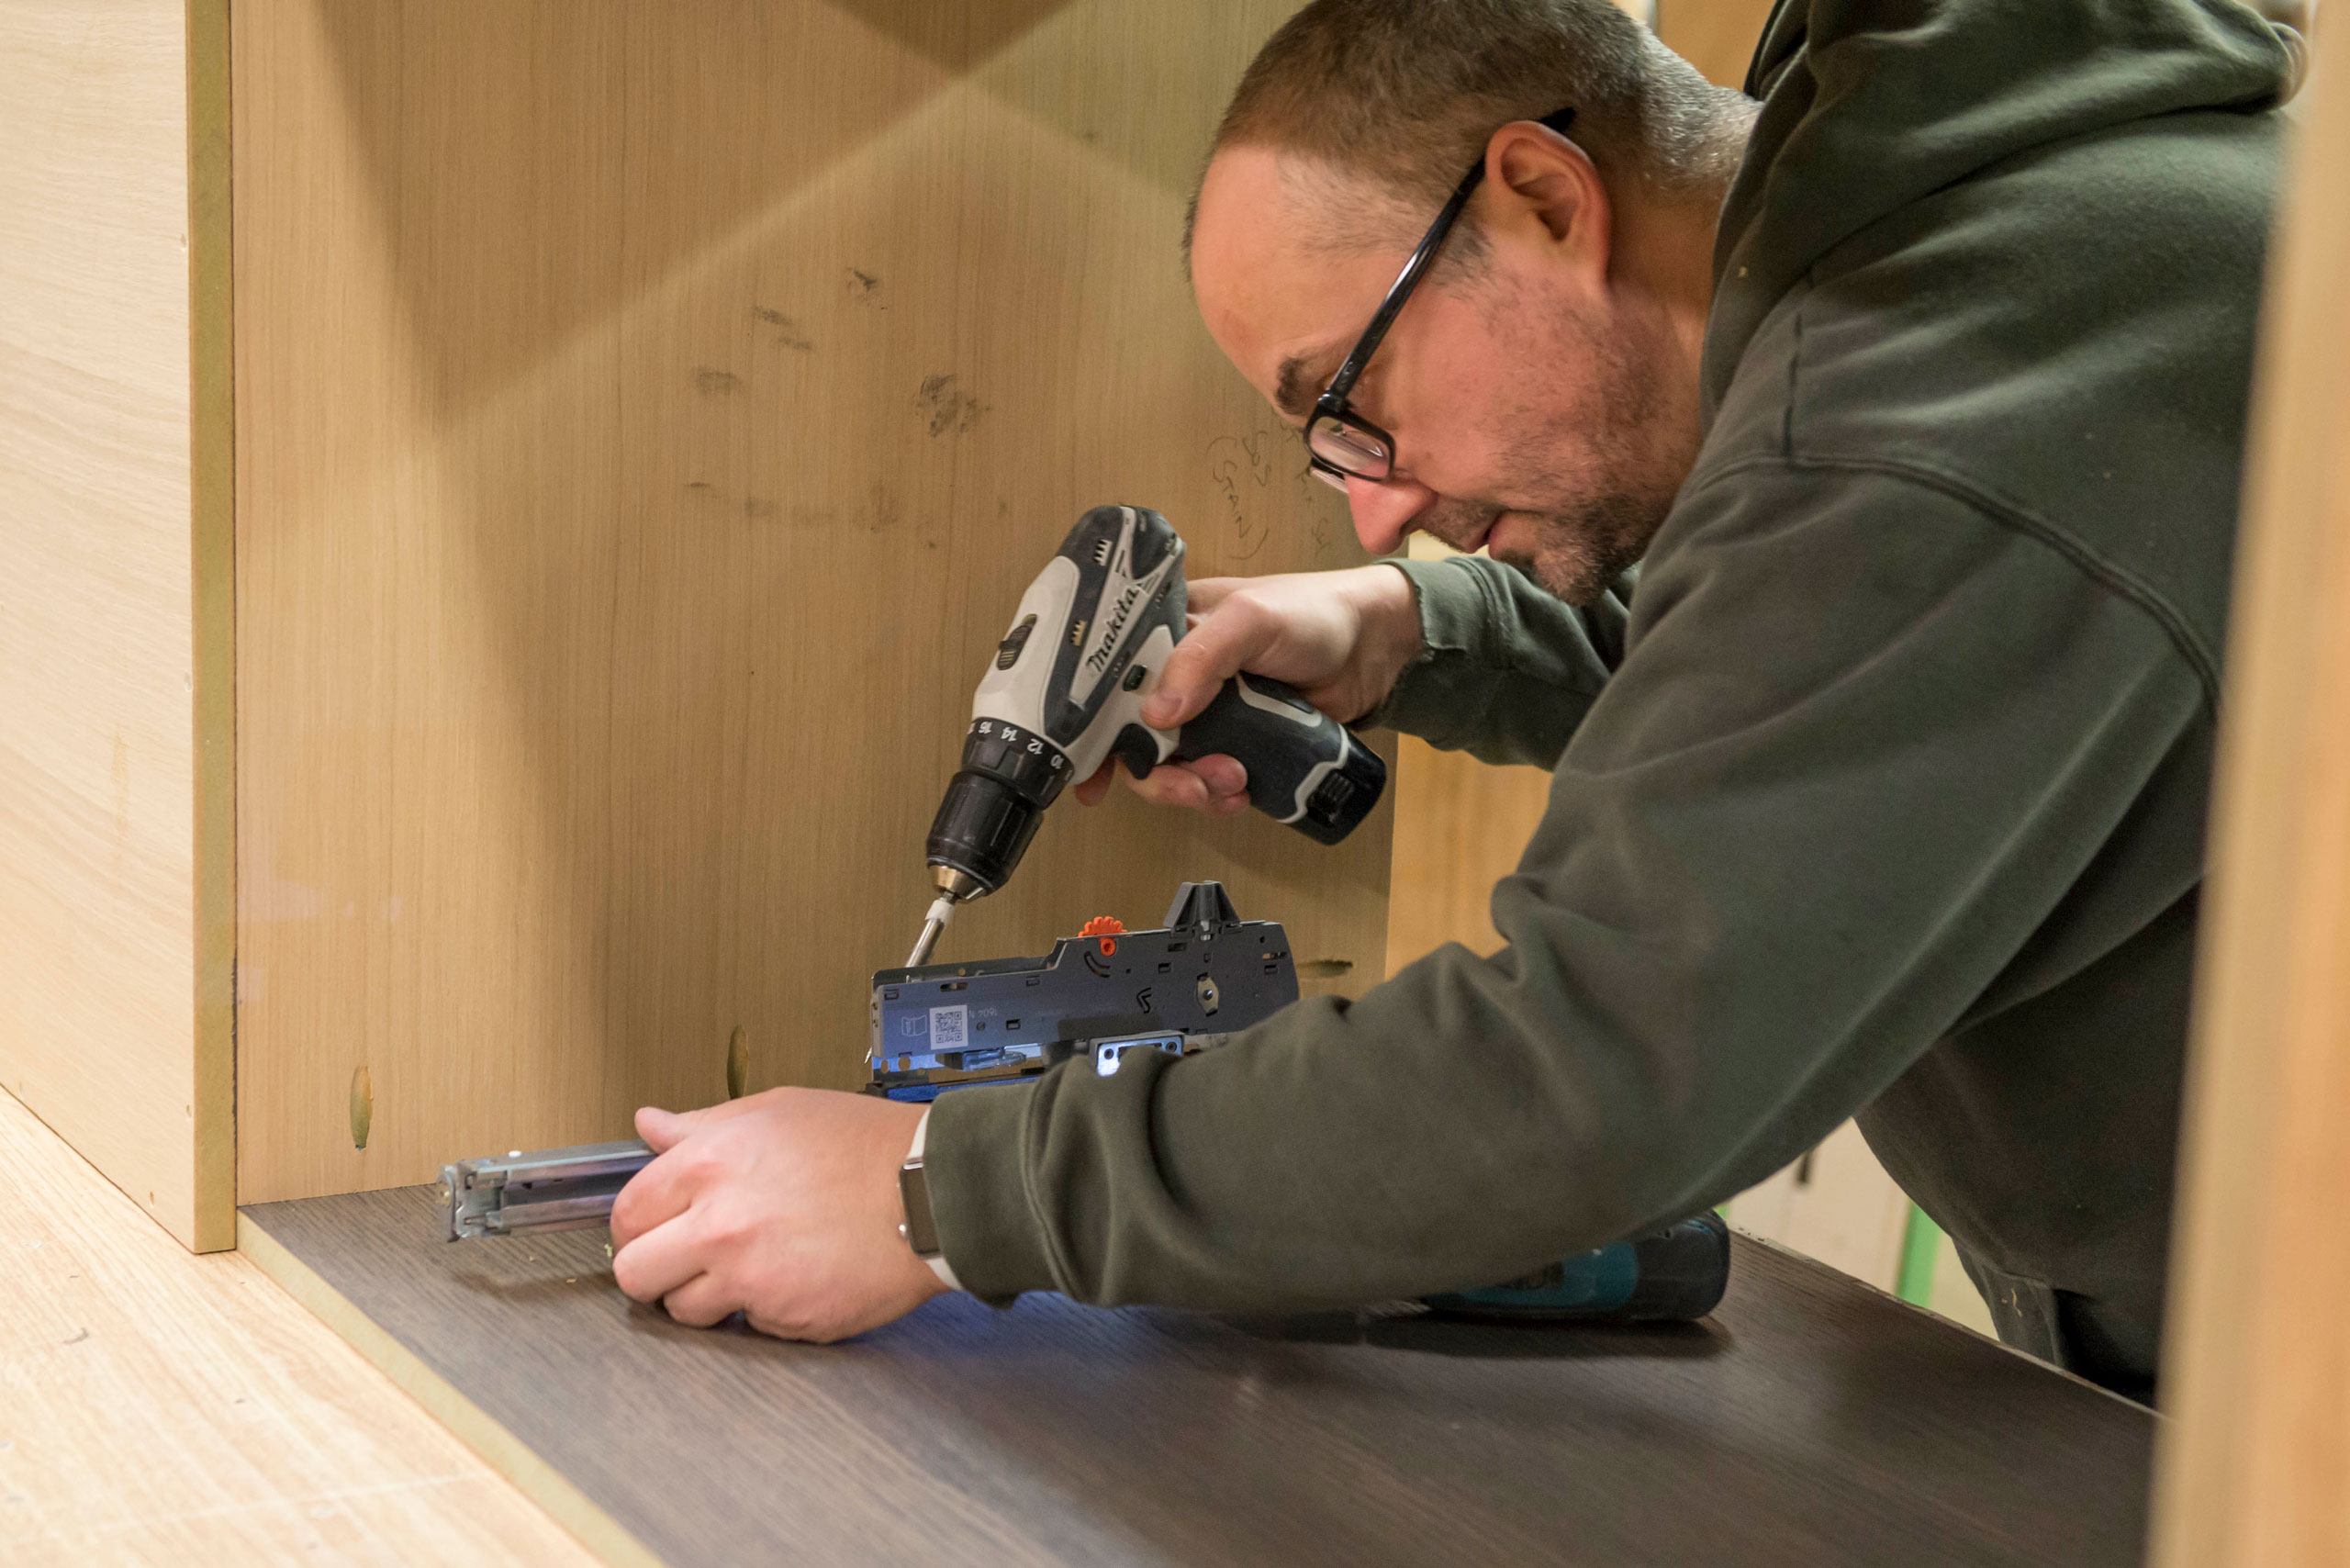 Chamber Furniture has a team of craftsmen and installers to manufacture bespoke furniture